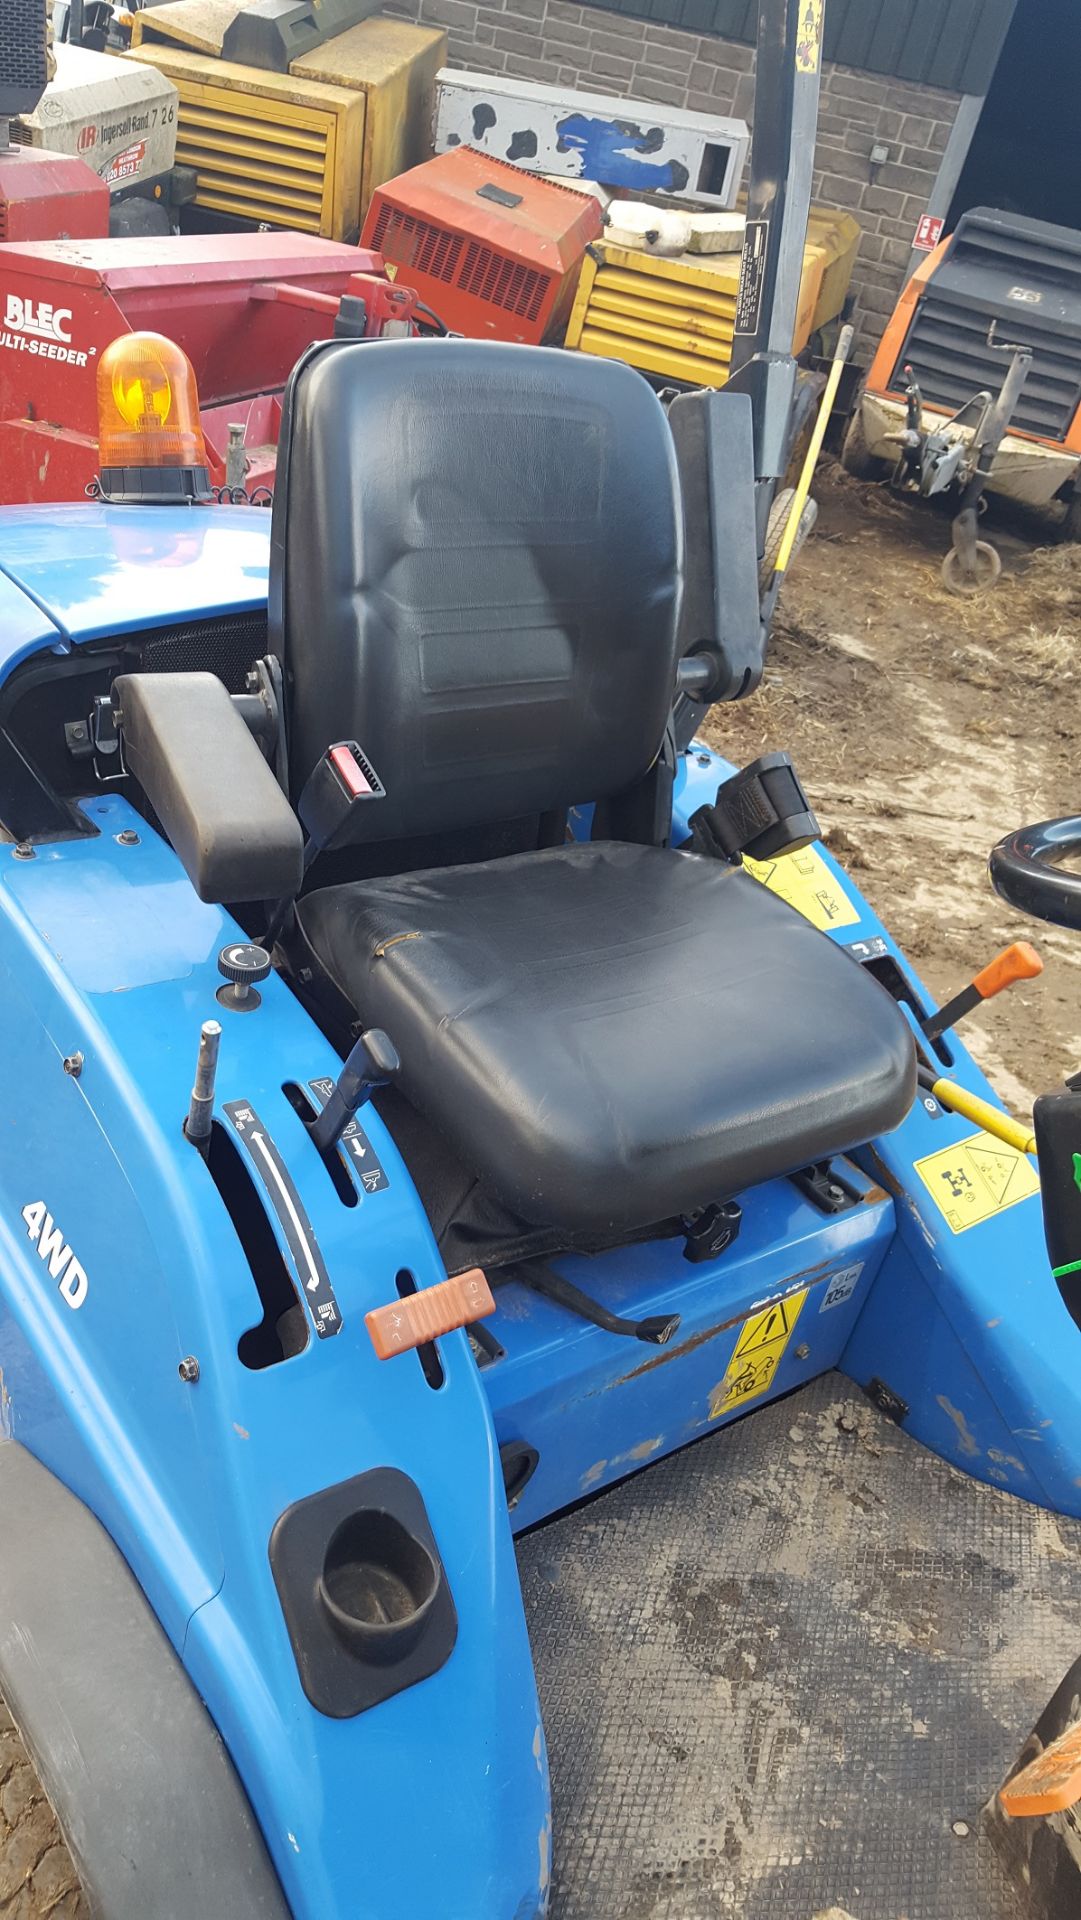 2010/60 REG NEW HOLLAND MC35 4WD RIDE ON LAWN MOWER LOW HOURS *PLUS VAT* - Image 4 of 7